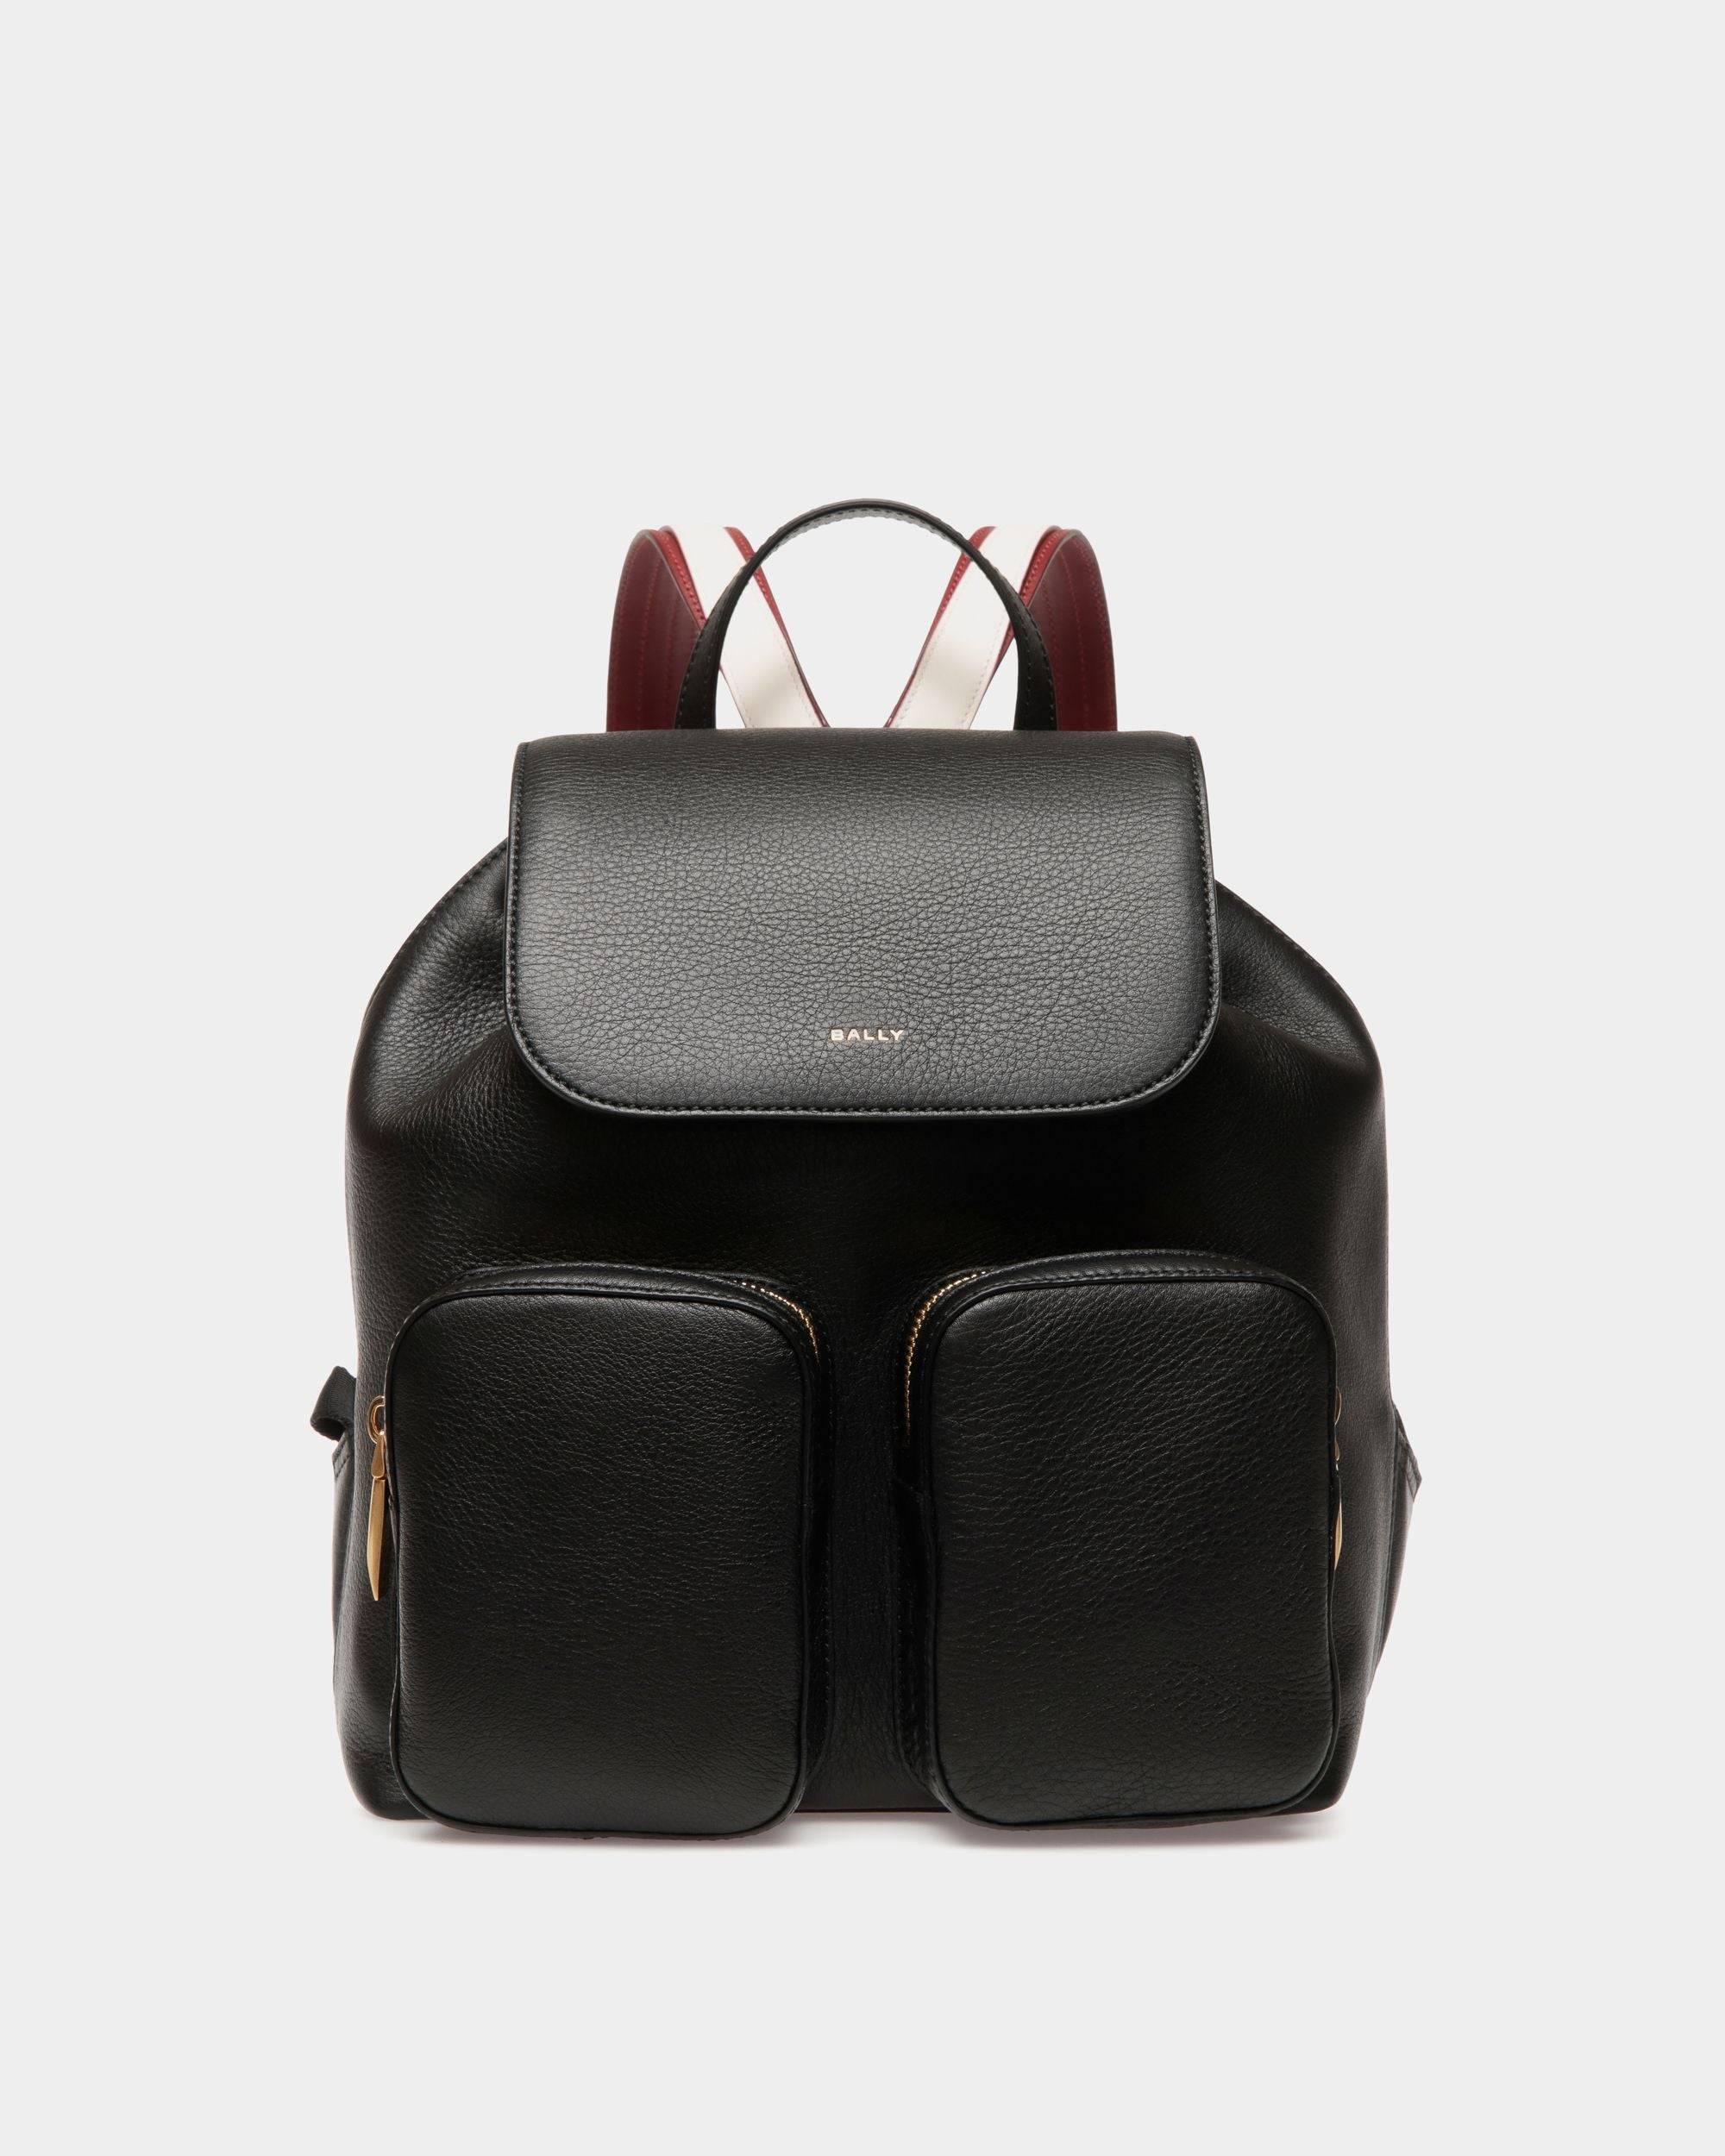 Code Backpack in Black Leather - Women's - Bally - 01